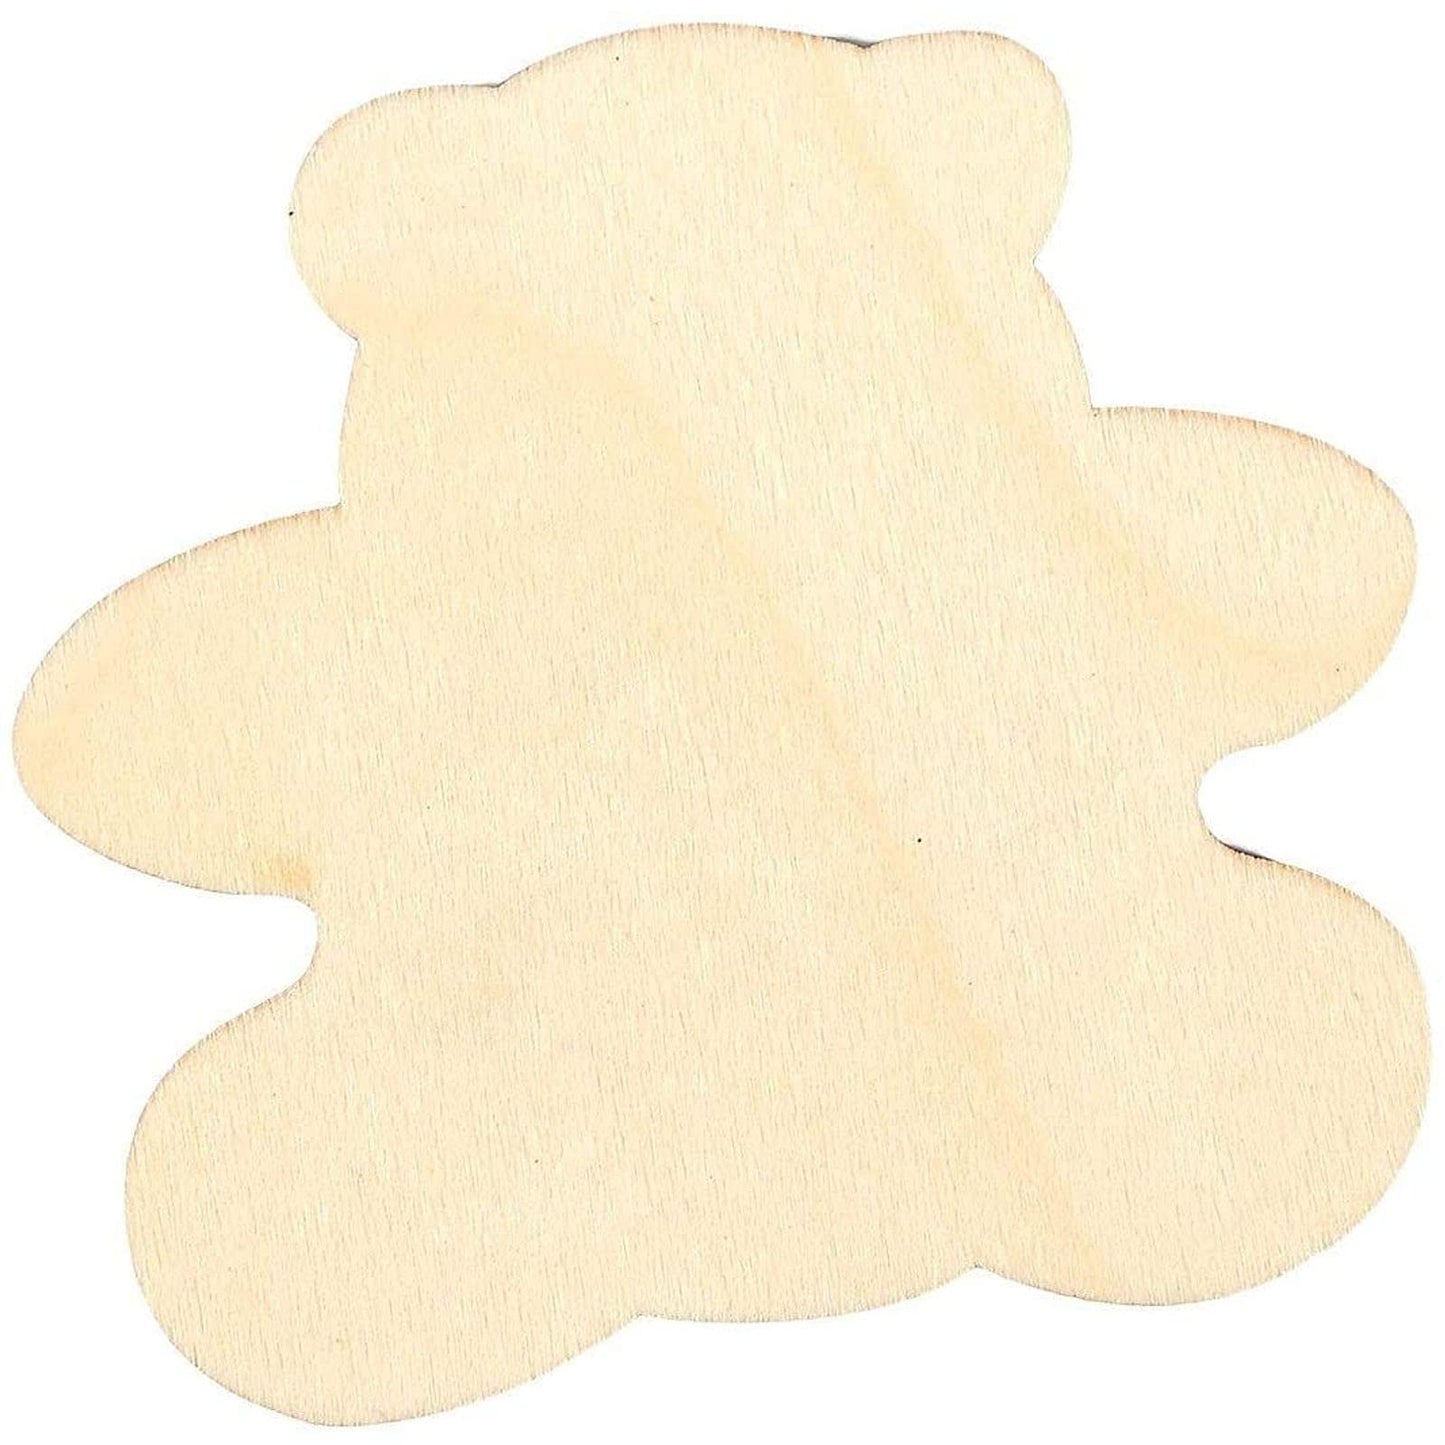 24 Pack Wooden Teddy Bear Cutouts for Crafts, Unfinished Wood Pieces for DIY Projects (3.7 x 3.5 in)